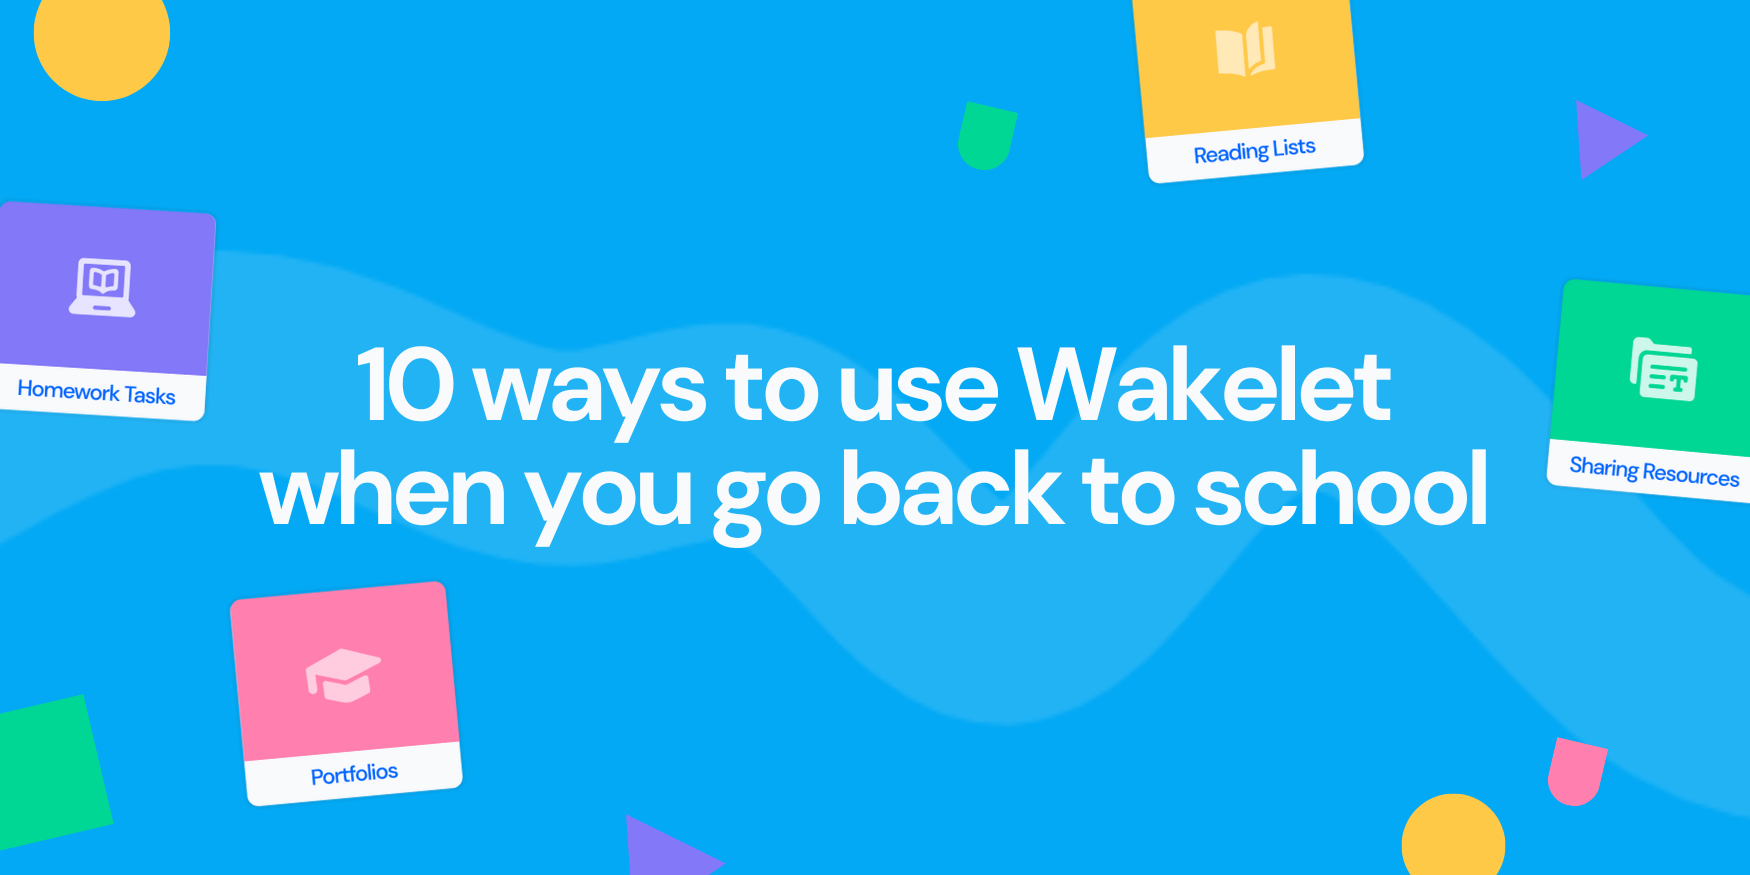 10 ways to use Wakelet when you go back to school